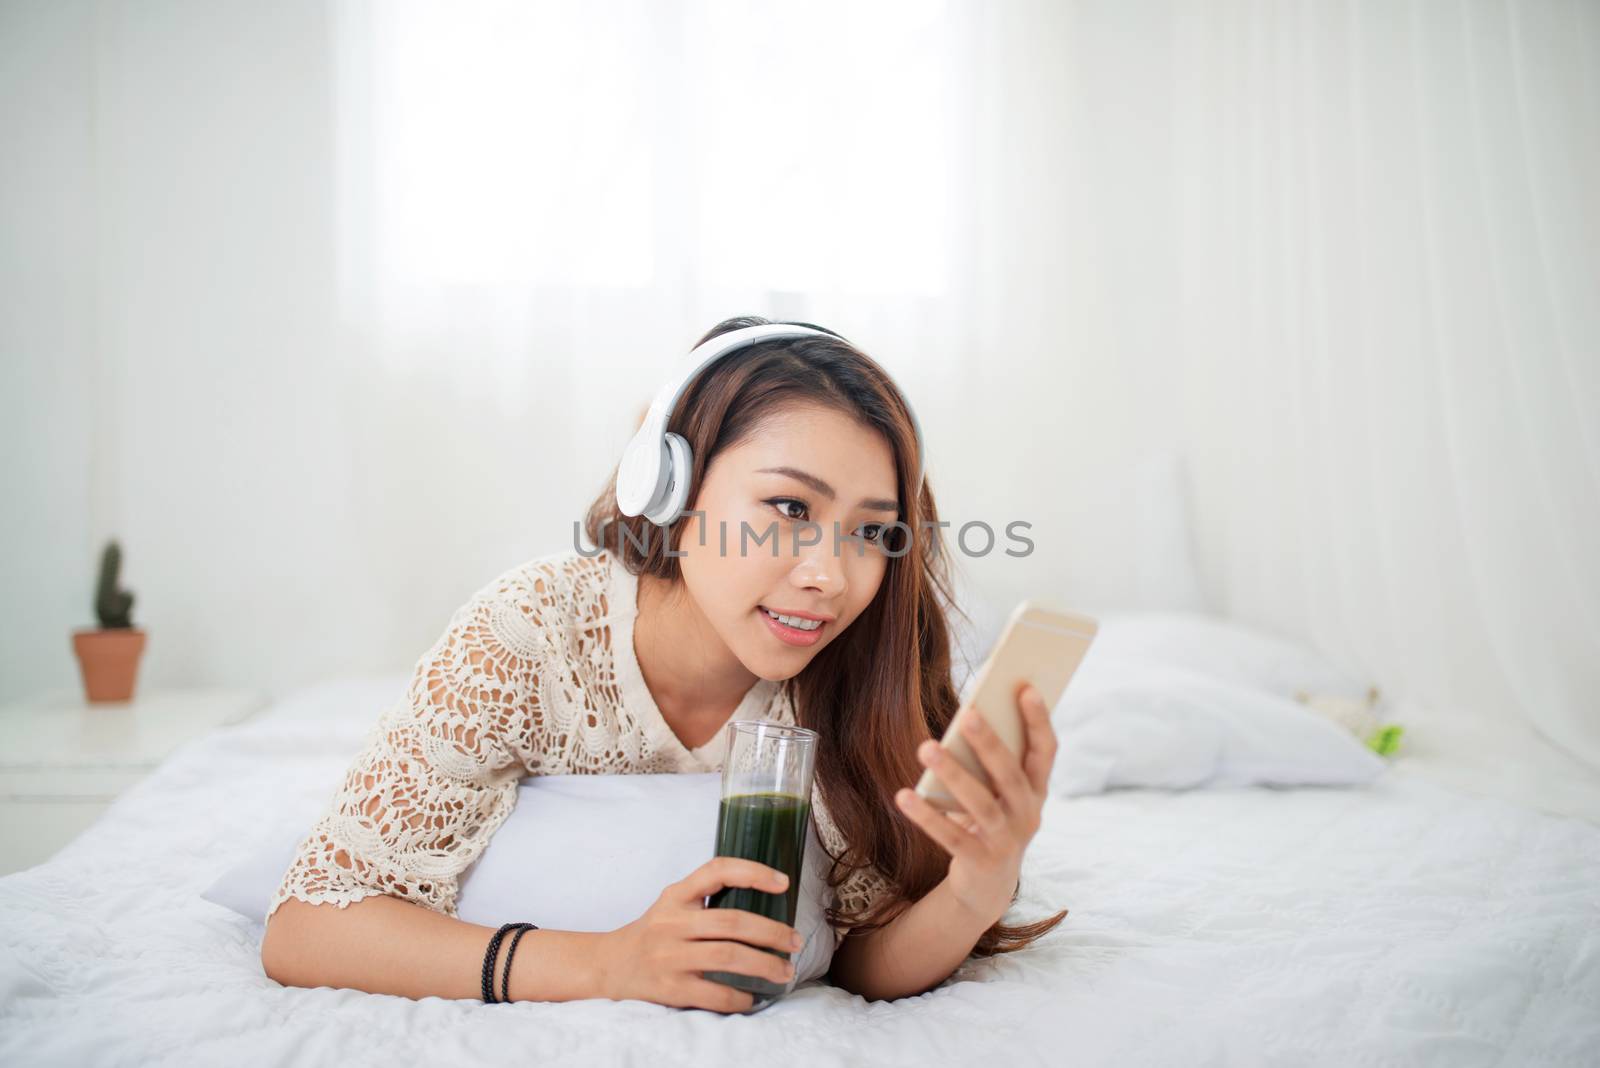 Woman Relaxing in bed and using mobile phone, relaxing in her living room